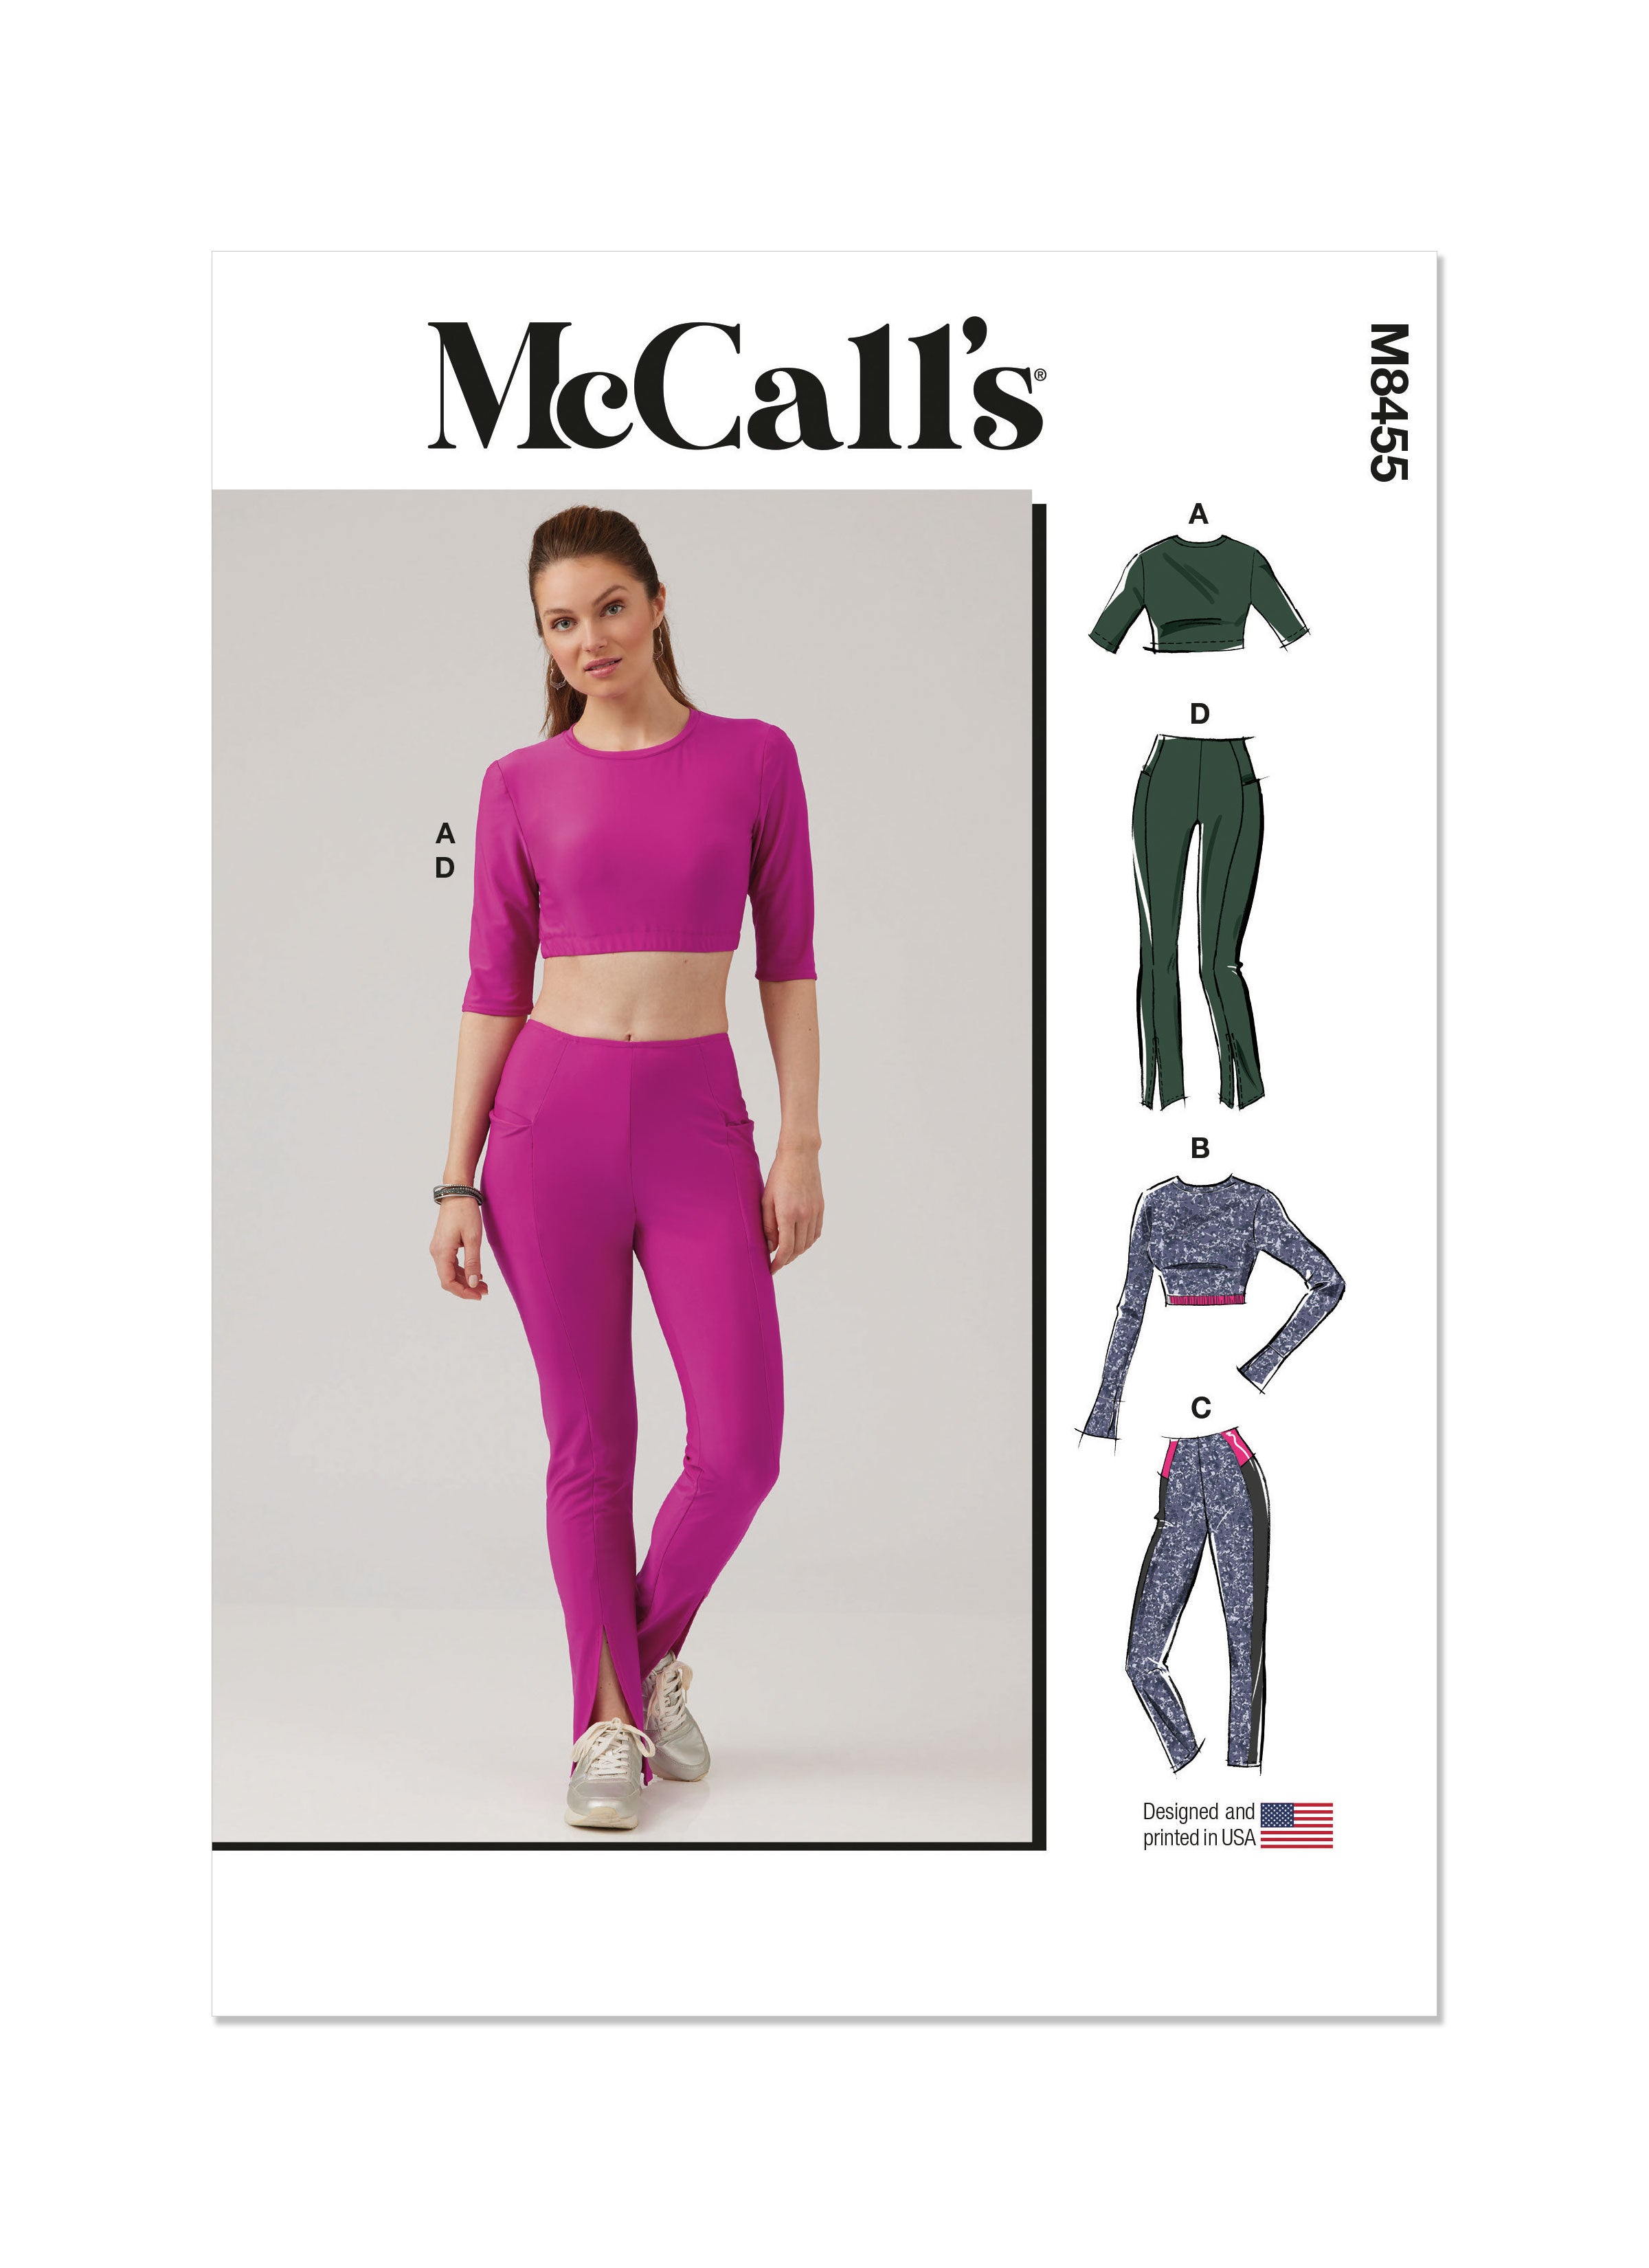 McCall's Sewing Pattern 8455 Crop Top and Leggings from Jaycotts Sewing Supplies